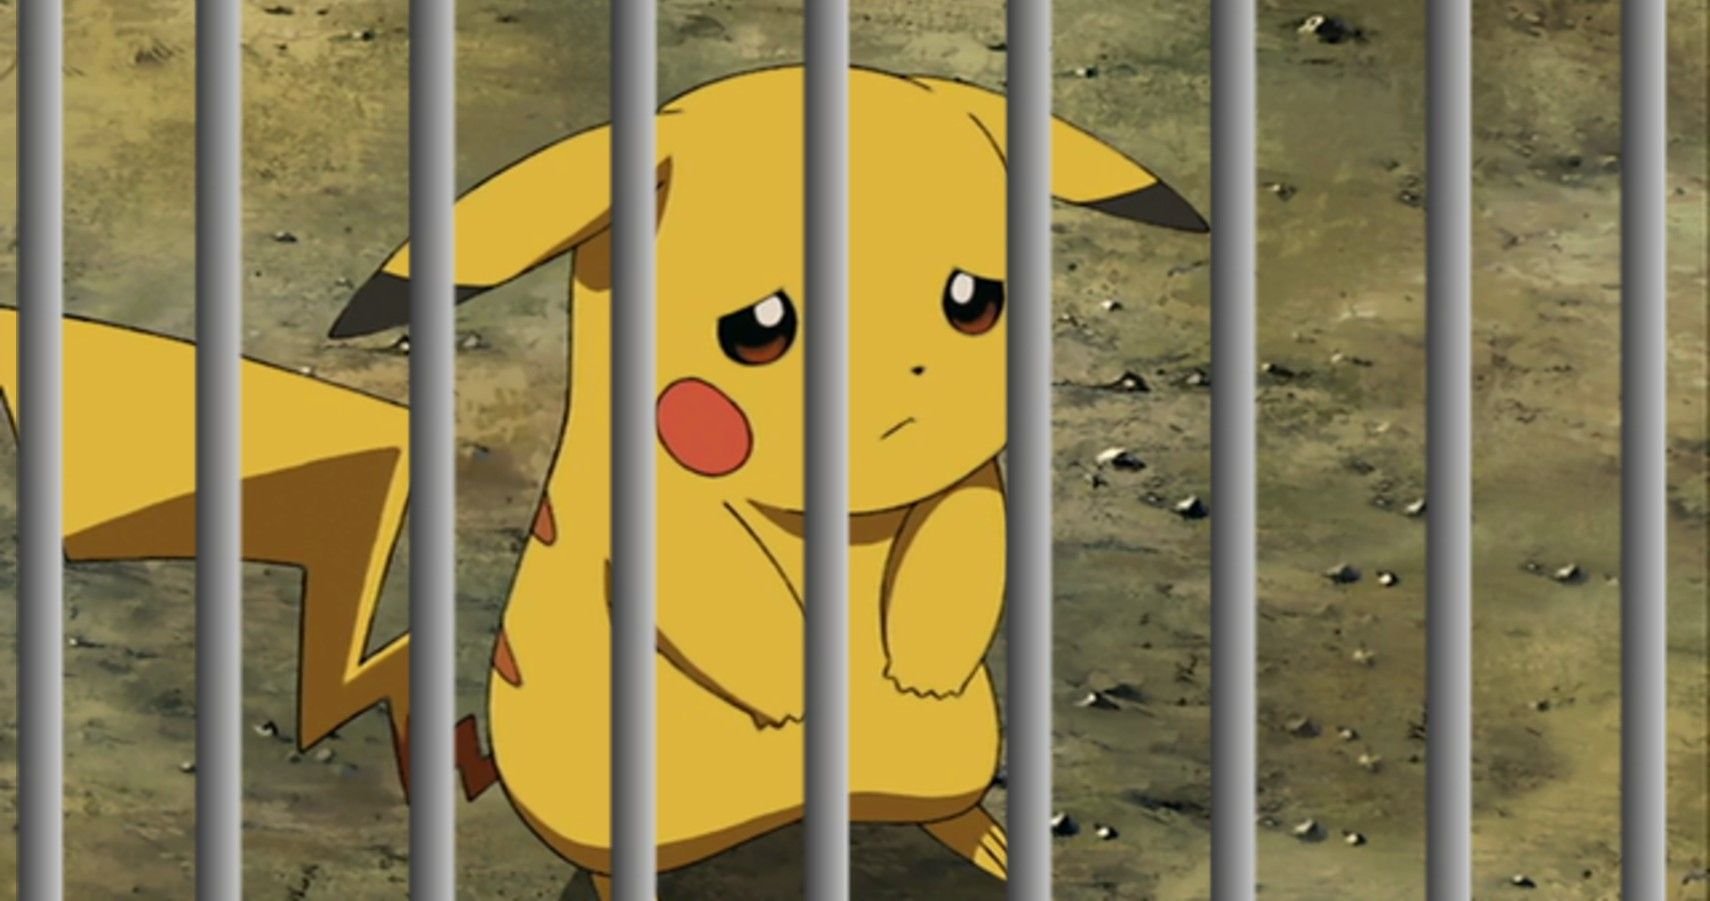 Pikachu Has Been Arrested In The Latest Episode Of The Pokemon Anime